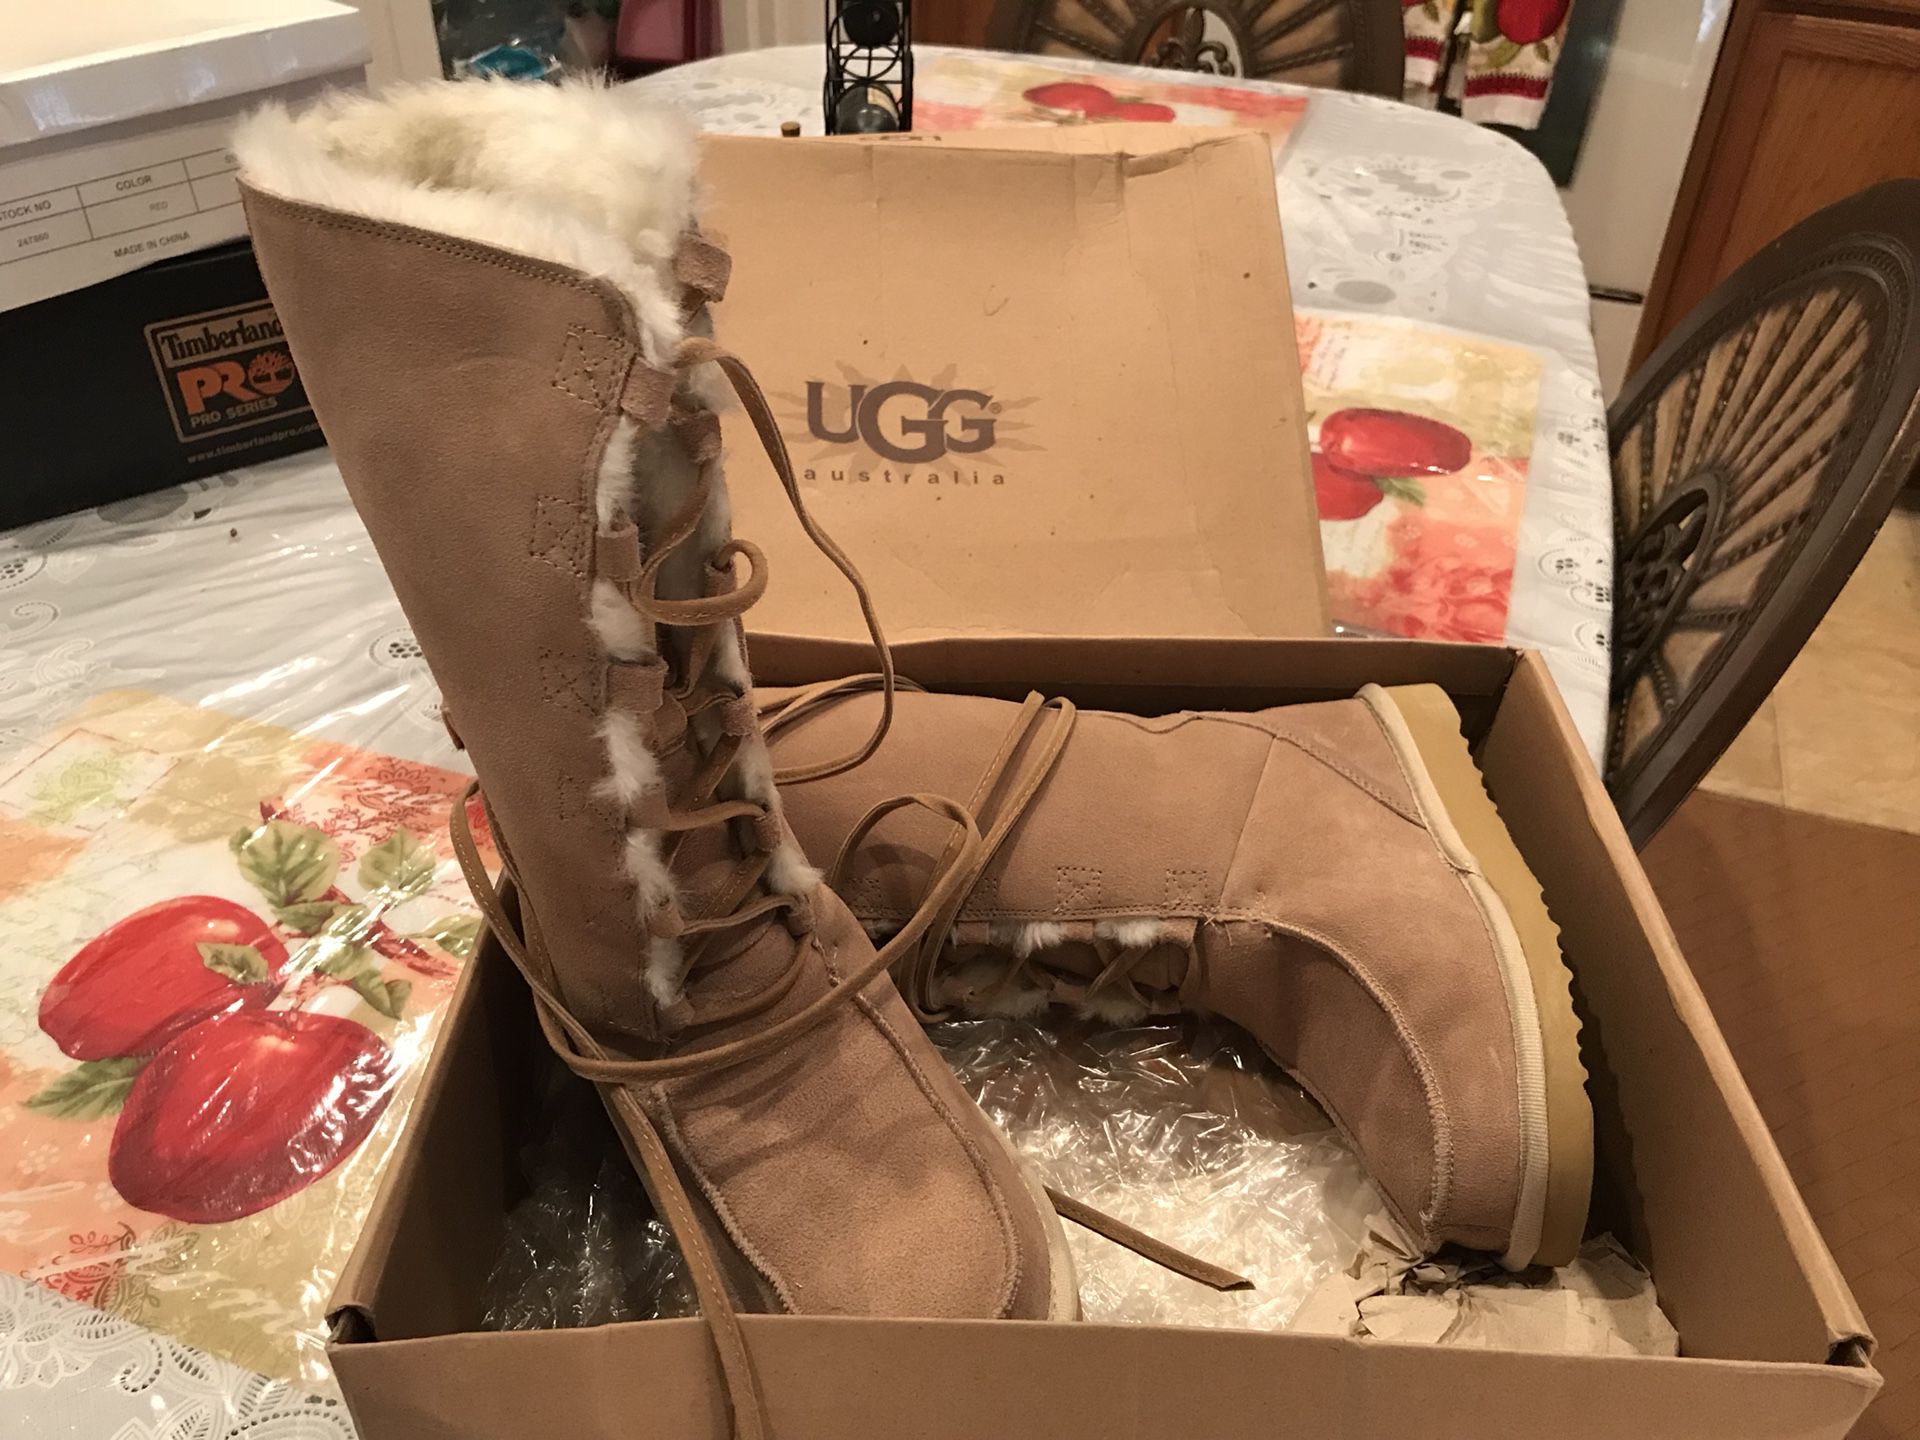 Pair of UGG boots